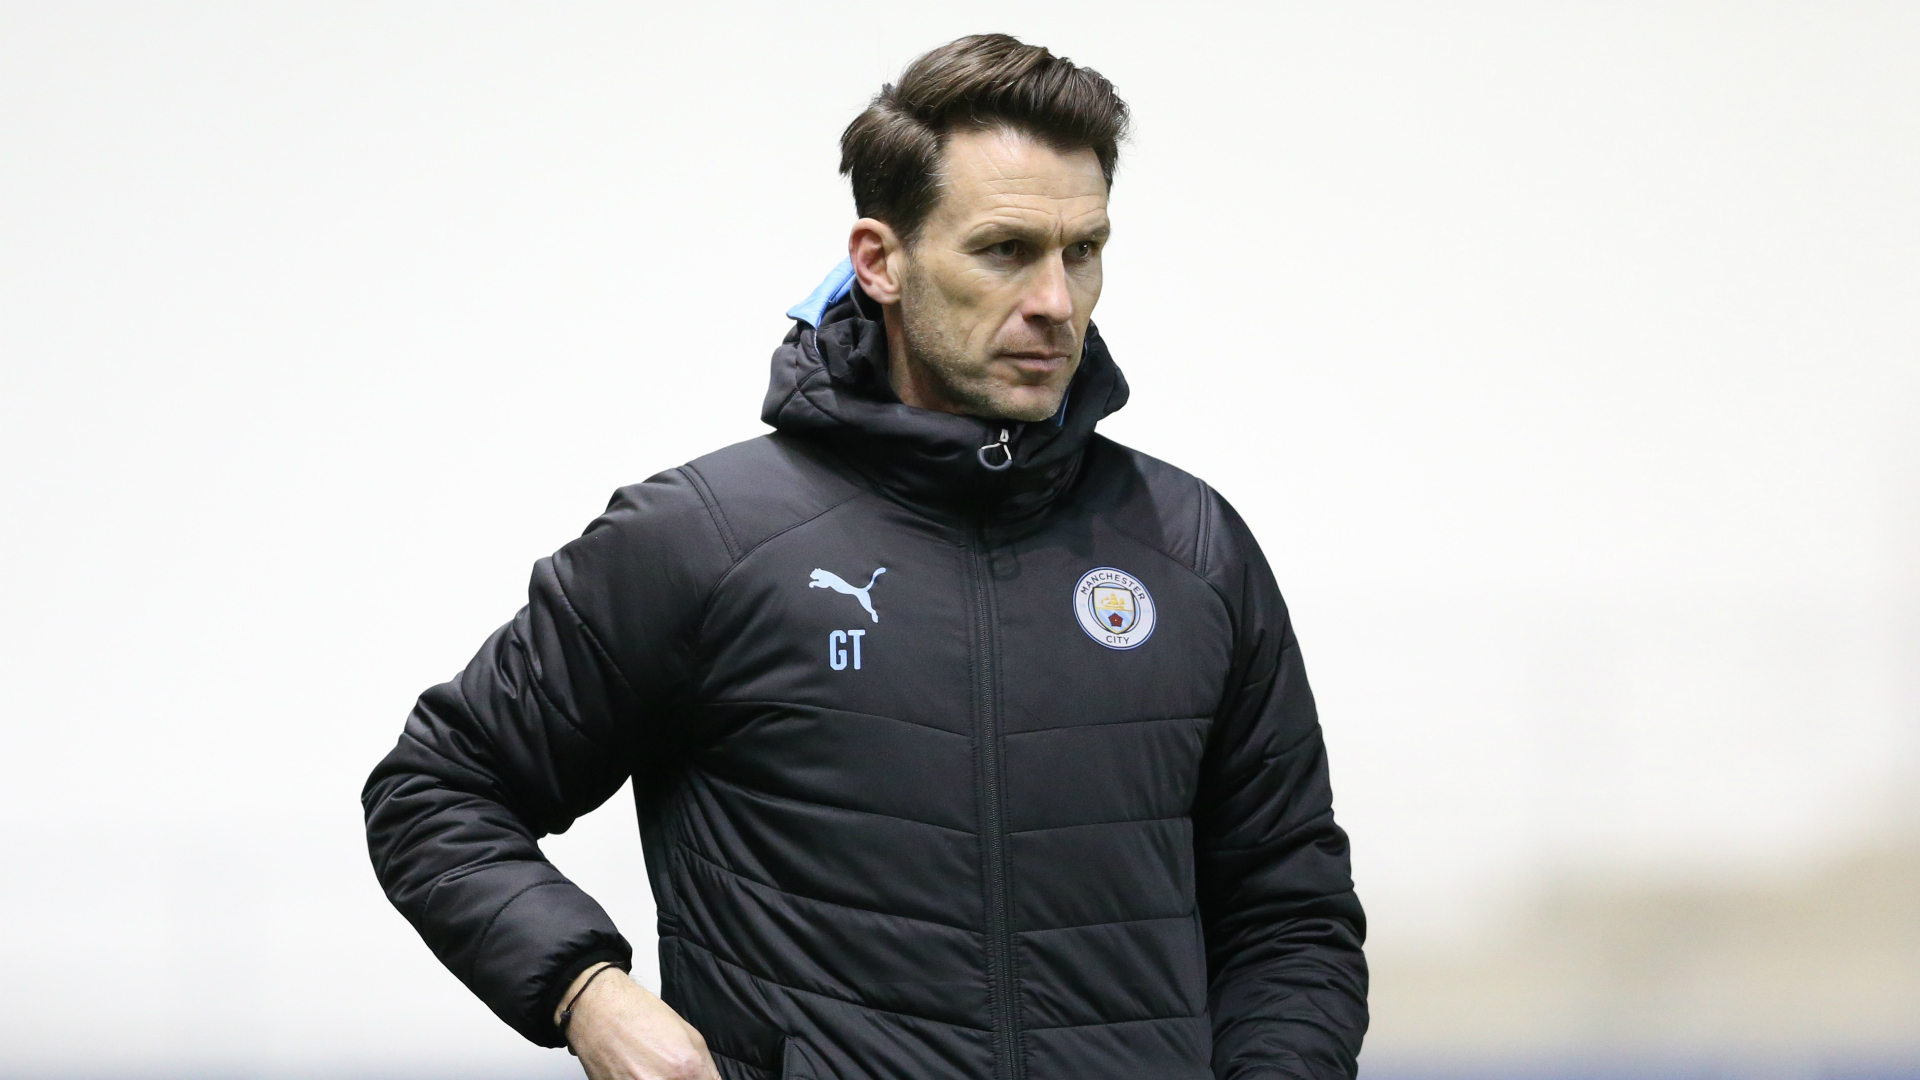 Gareth Taylor, a former Manchester City player and youth coach, has been named the new boss of the club's women's team.